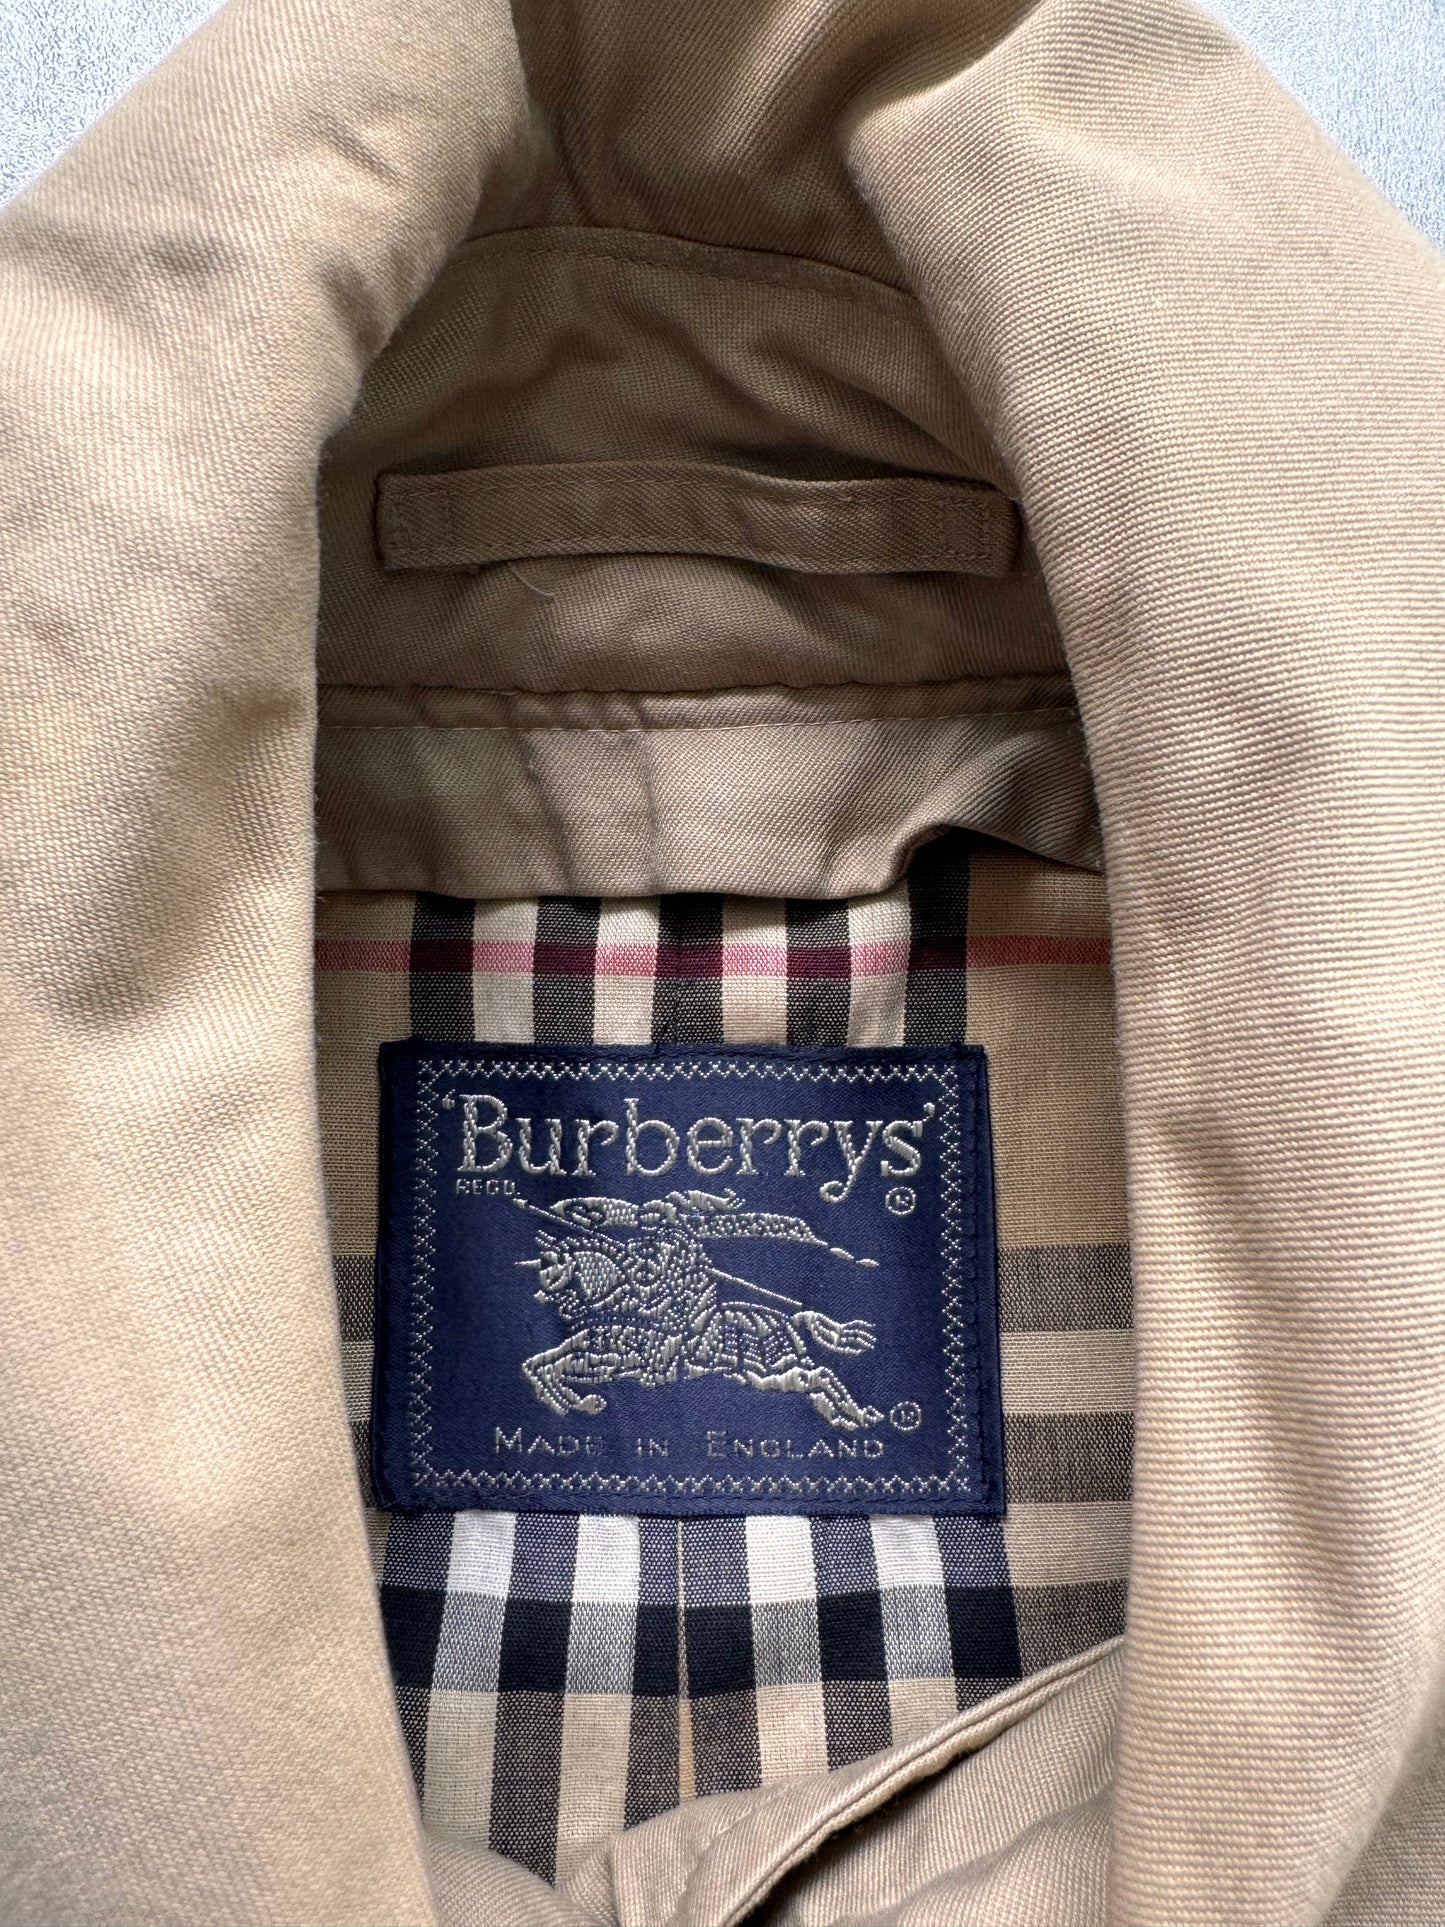 1990s Burberrys English Beige Trench Coat (M)